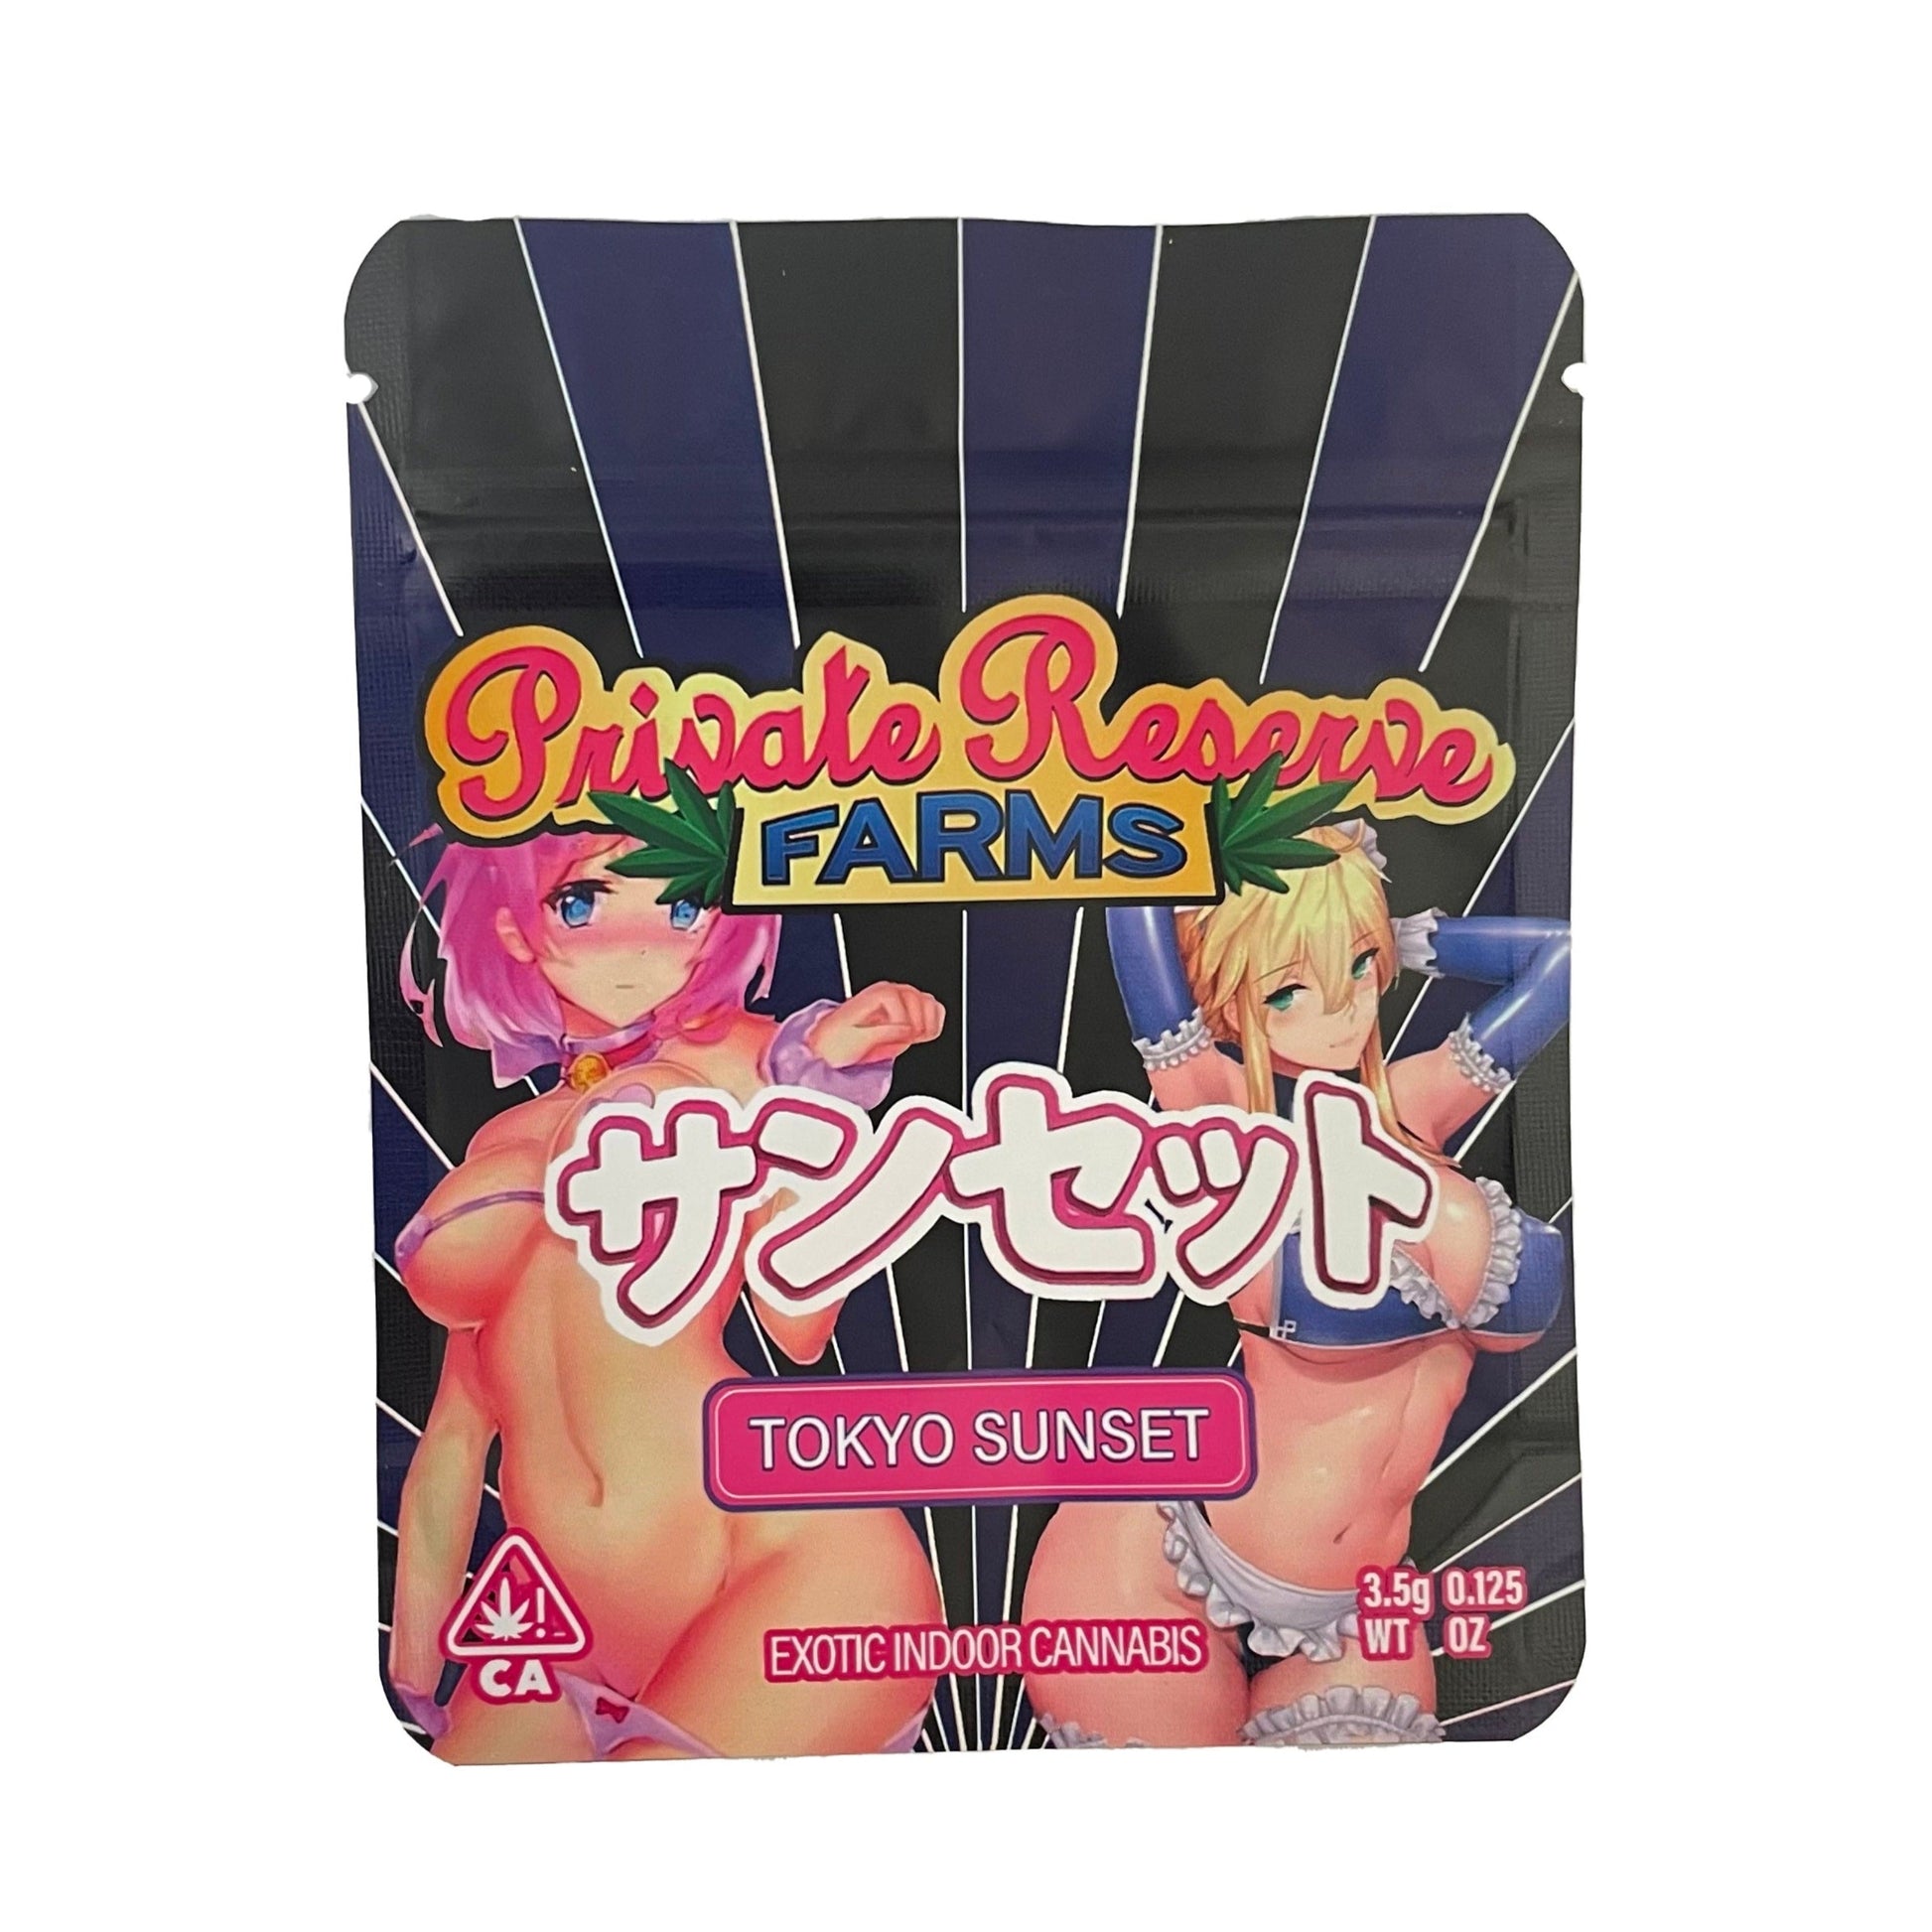 Tokyo Sunset Private Reserve Farms 3.5G Mylar Bags